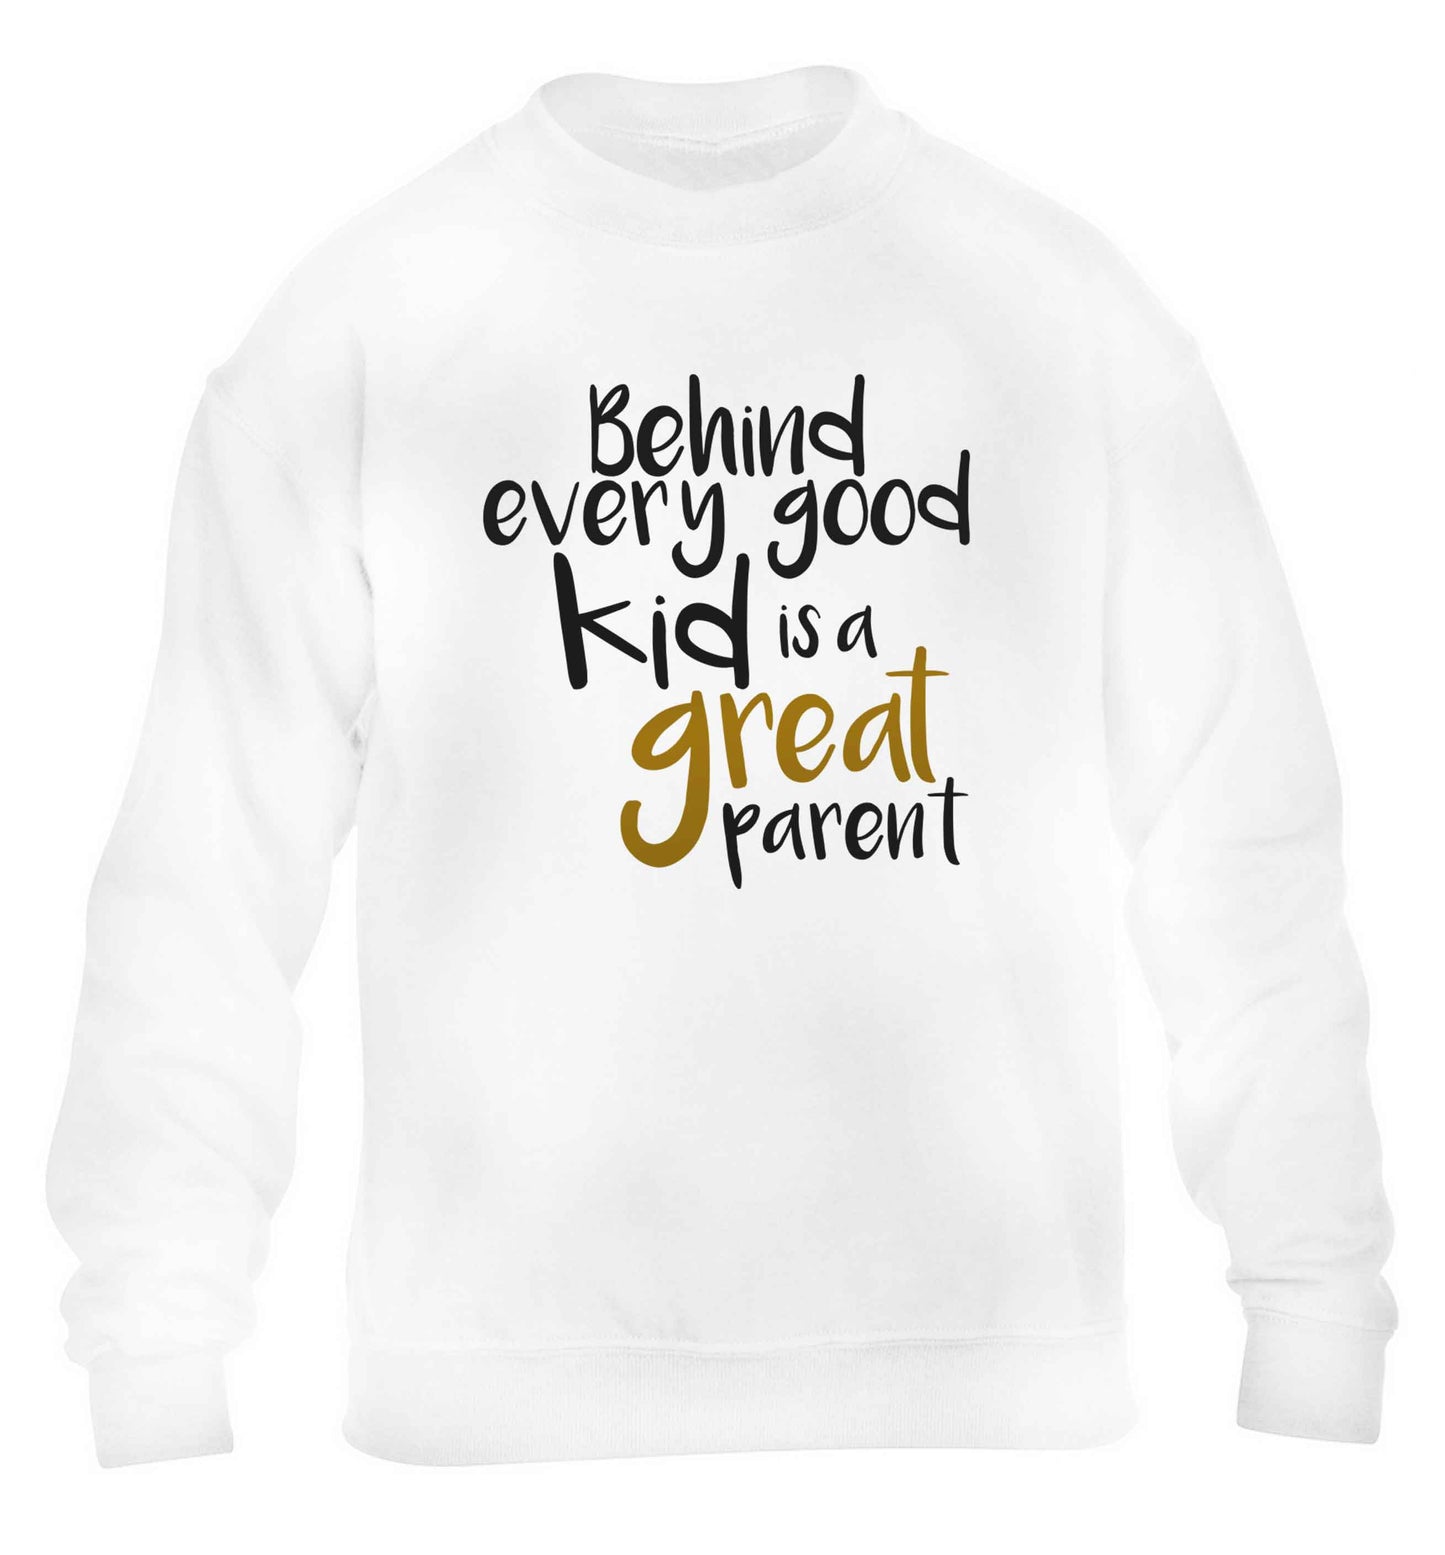 Behind every good kid is a great parent children's white sweater 12-13 Years